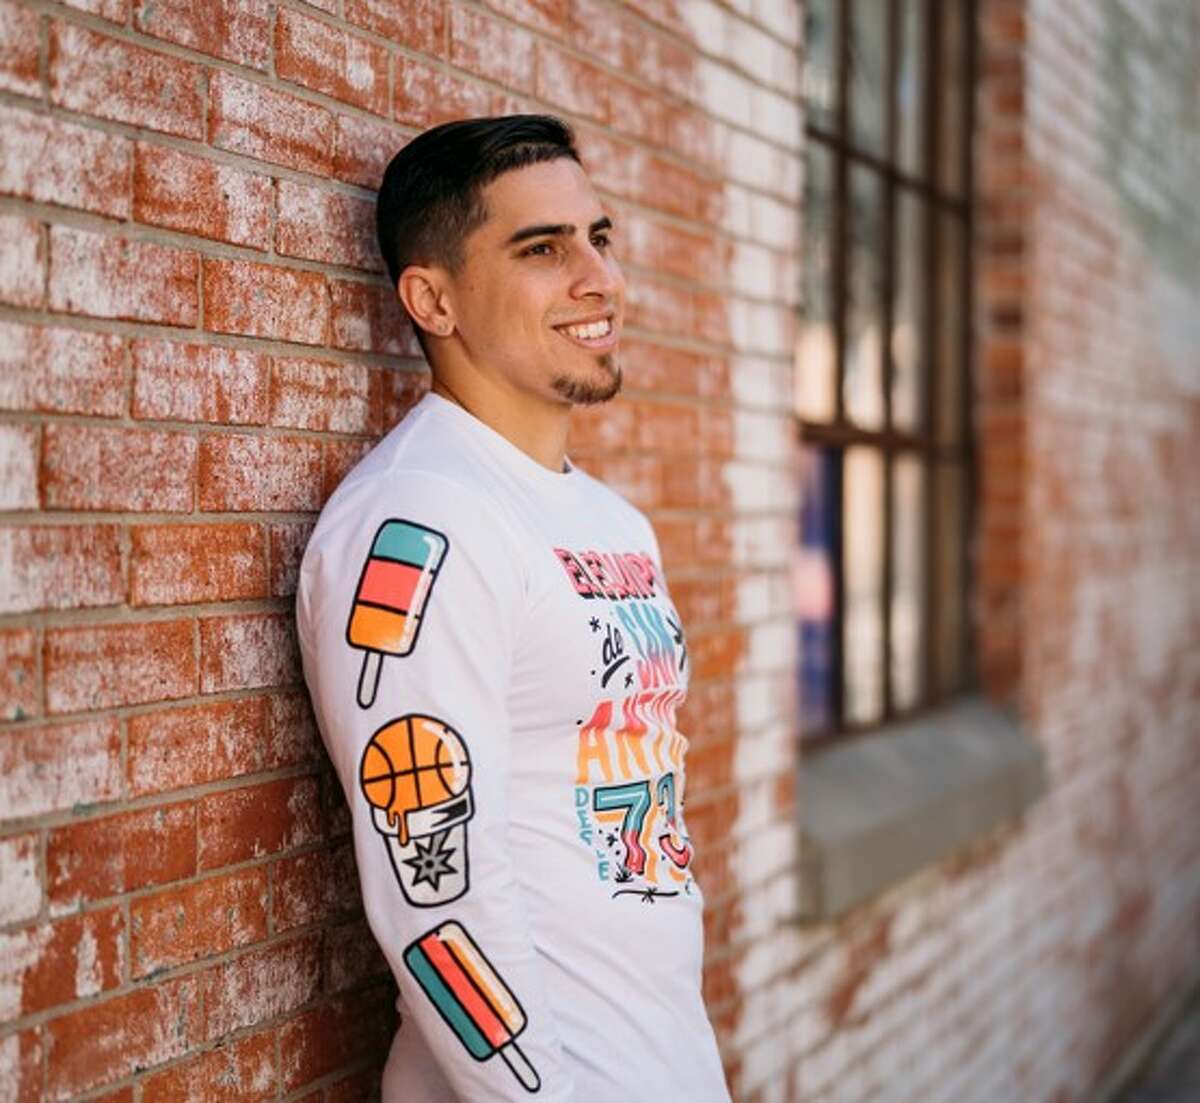 Spurs fans can snag new San Antonio-inspired threads starting Wednesday. 